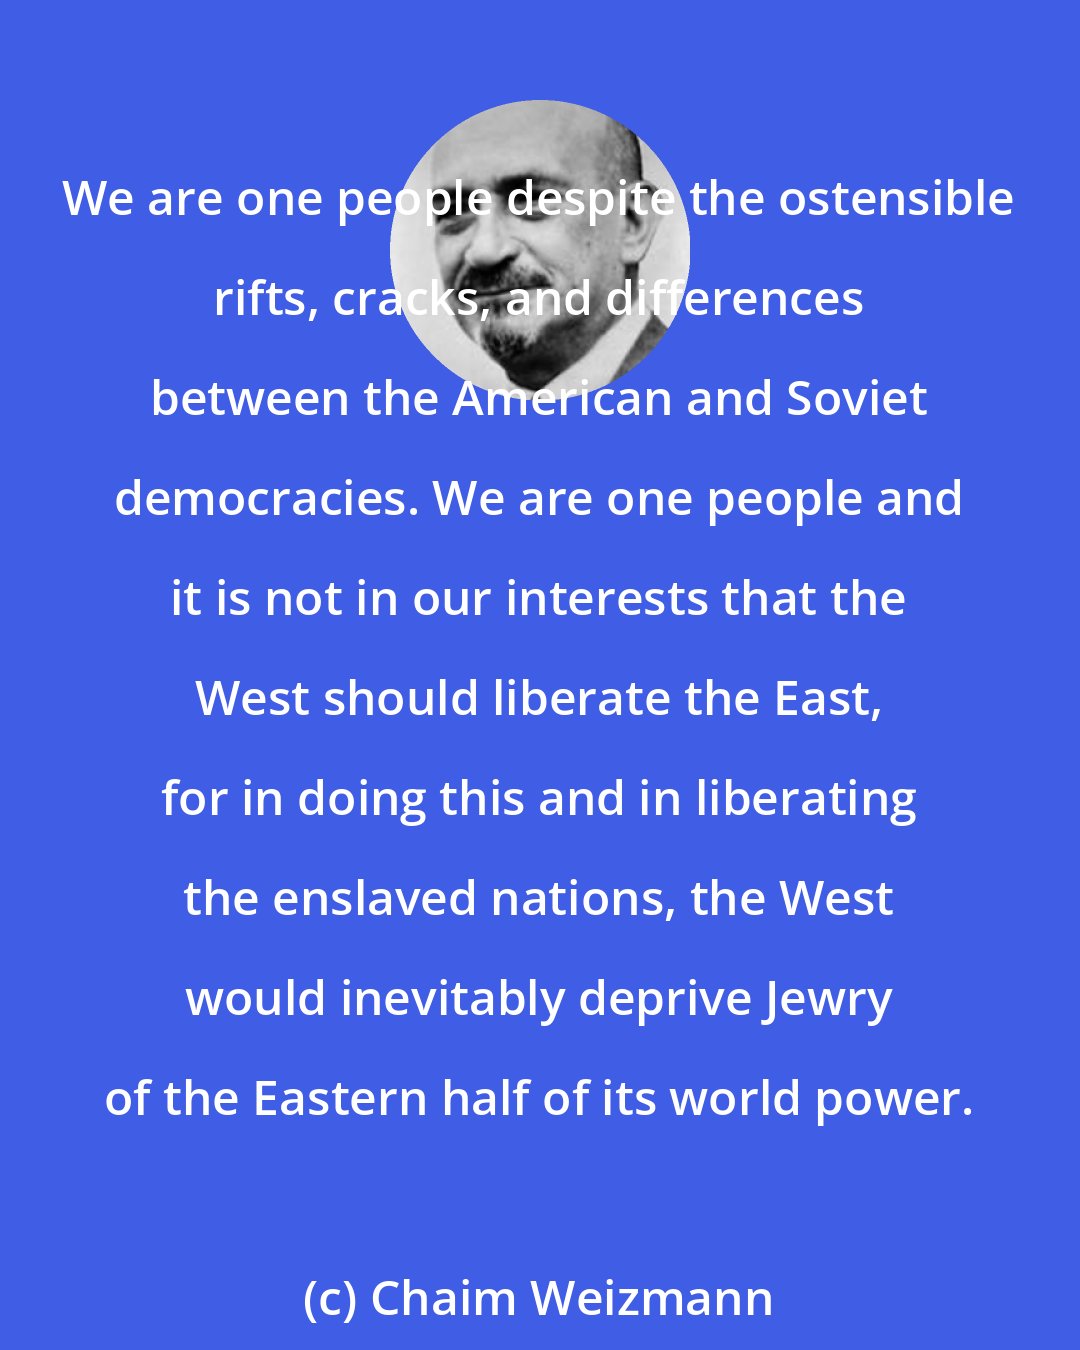 Chaim Weizmann: We are one people despite the ostensible rifts, cracks, and differences between the American and Soviet democracies. We are one people and it is not in our interests that the West should liberate the East, for in doing this and in liberating the enslaved nations, the West would inevitably deprive Jewry of the Eastern half of its world power.